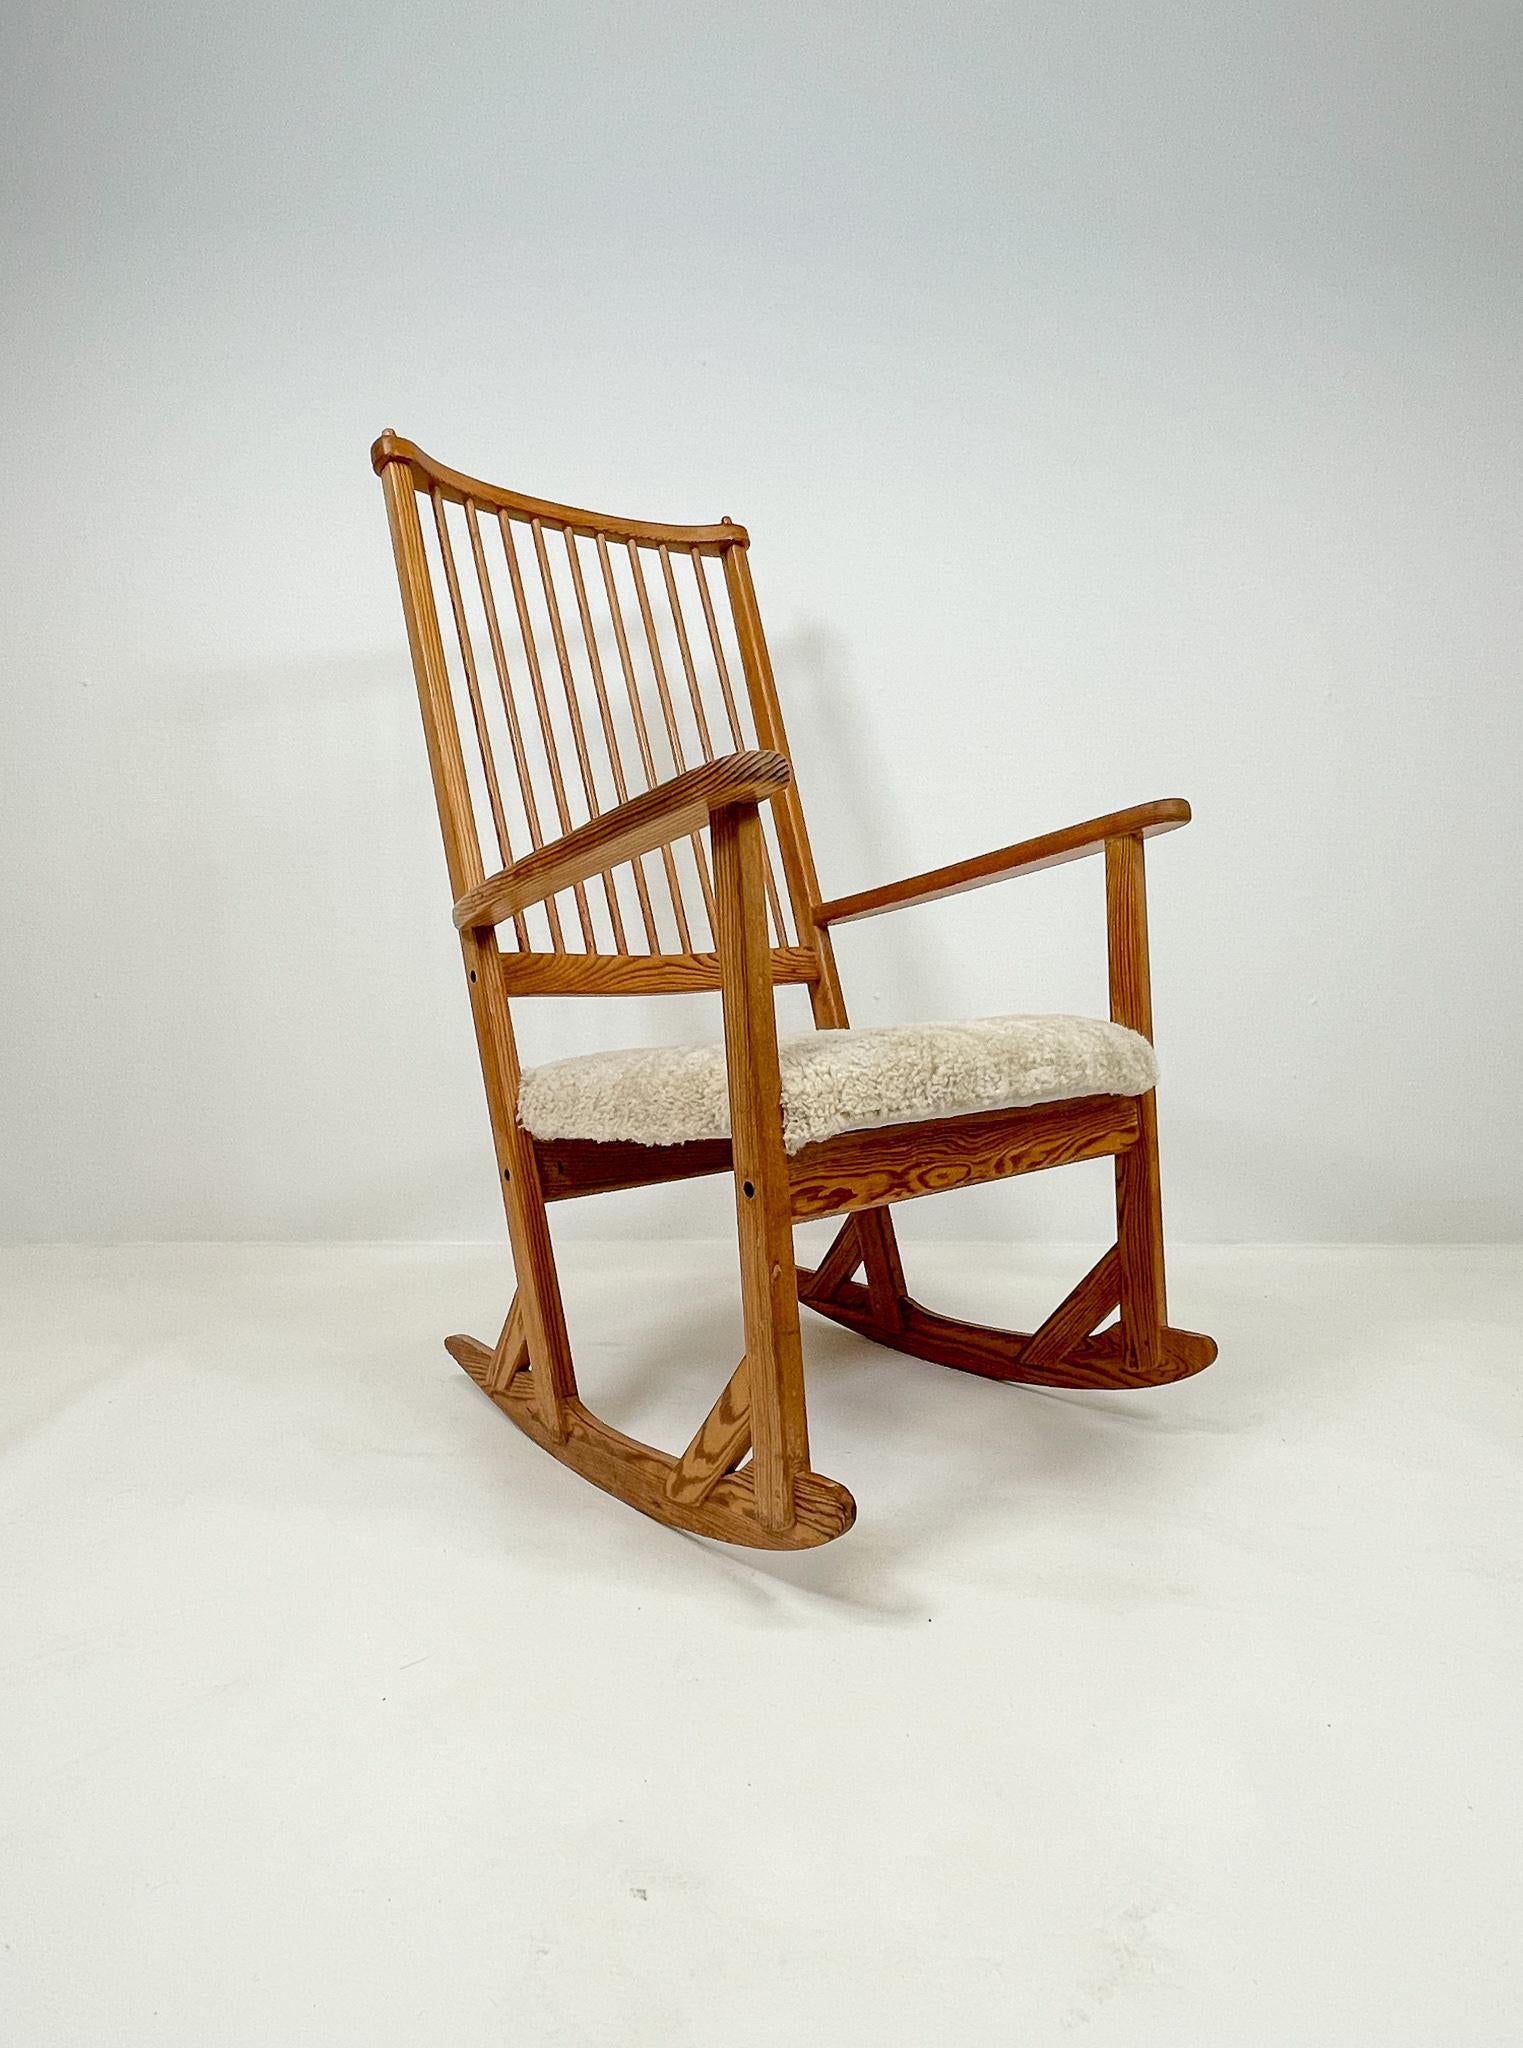 This wonderfully crafted rocking chair was designed by famous Swedish designer Yngve Ekström in 1970s and produced at Swedese. This one made in pine with a newly reupholstered seat in sheepskin. 

Good vintage condition with small marks on the